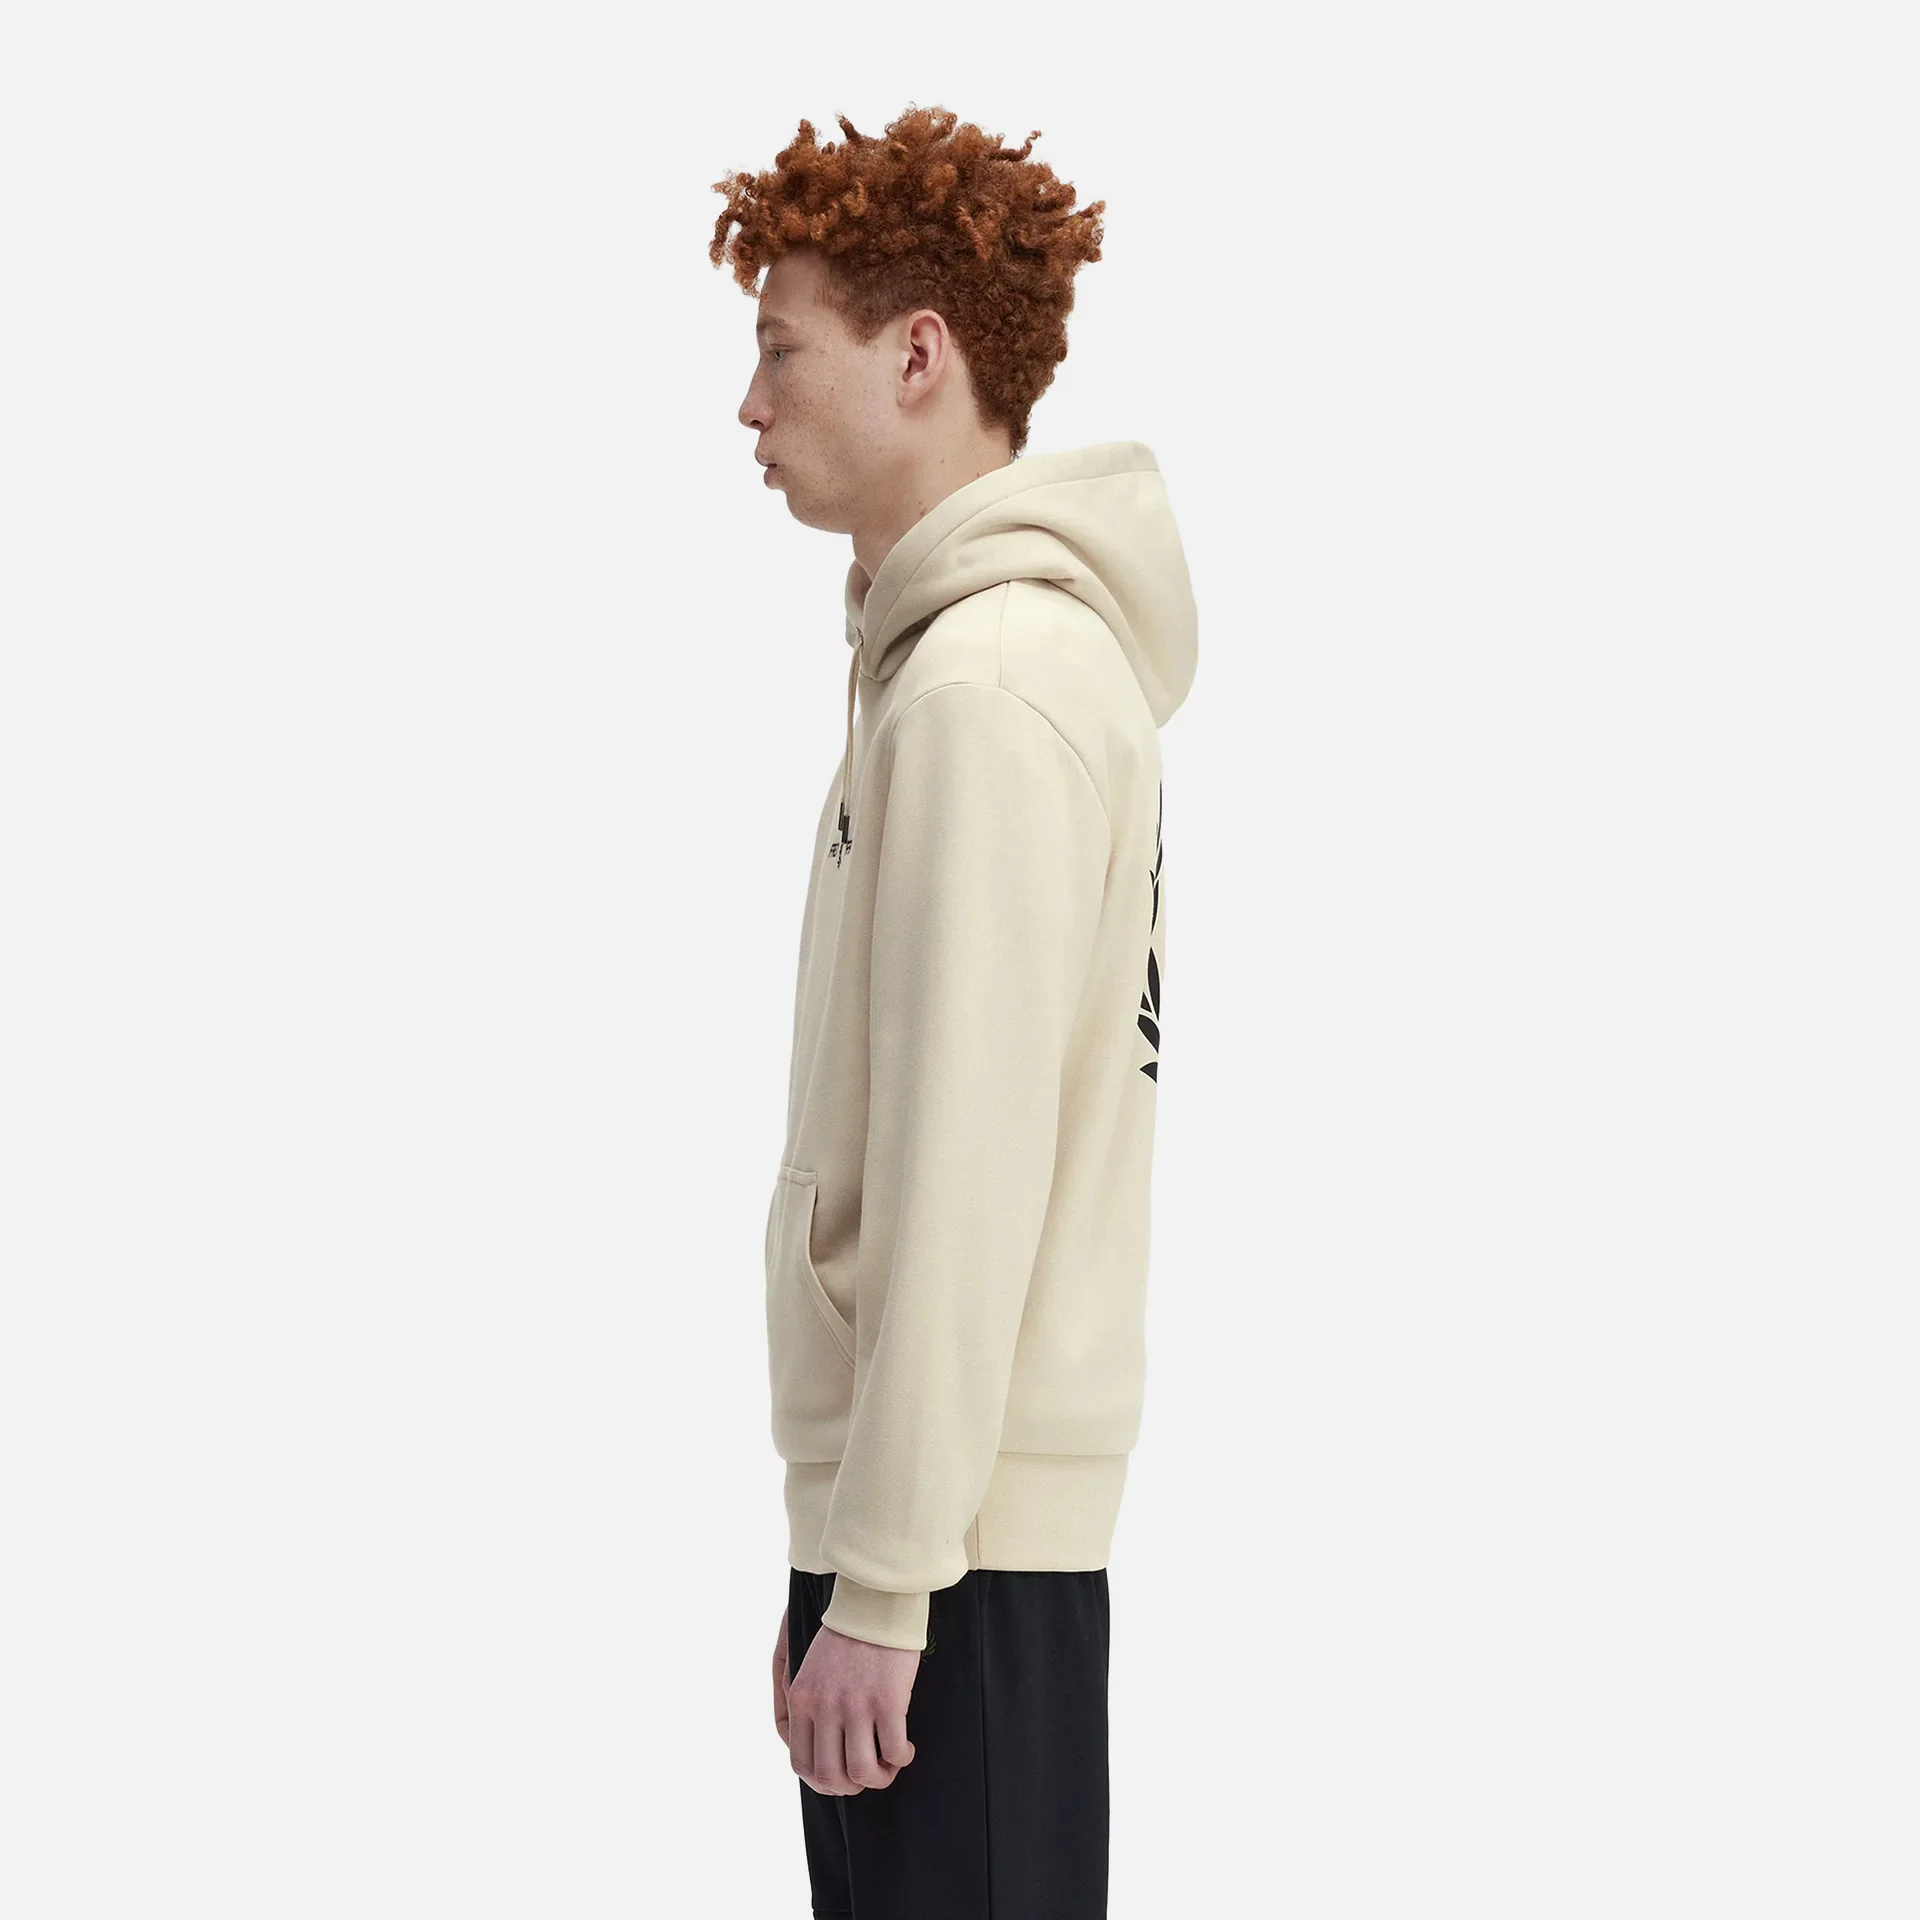 Fred Perry Front Back Graphic Hoodie Oatmeal